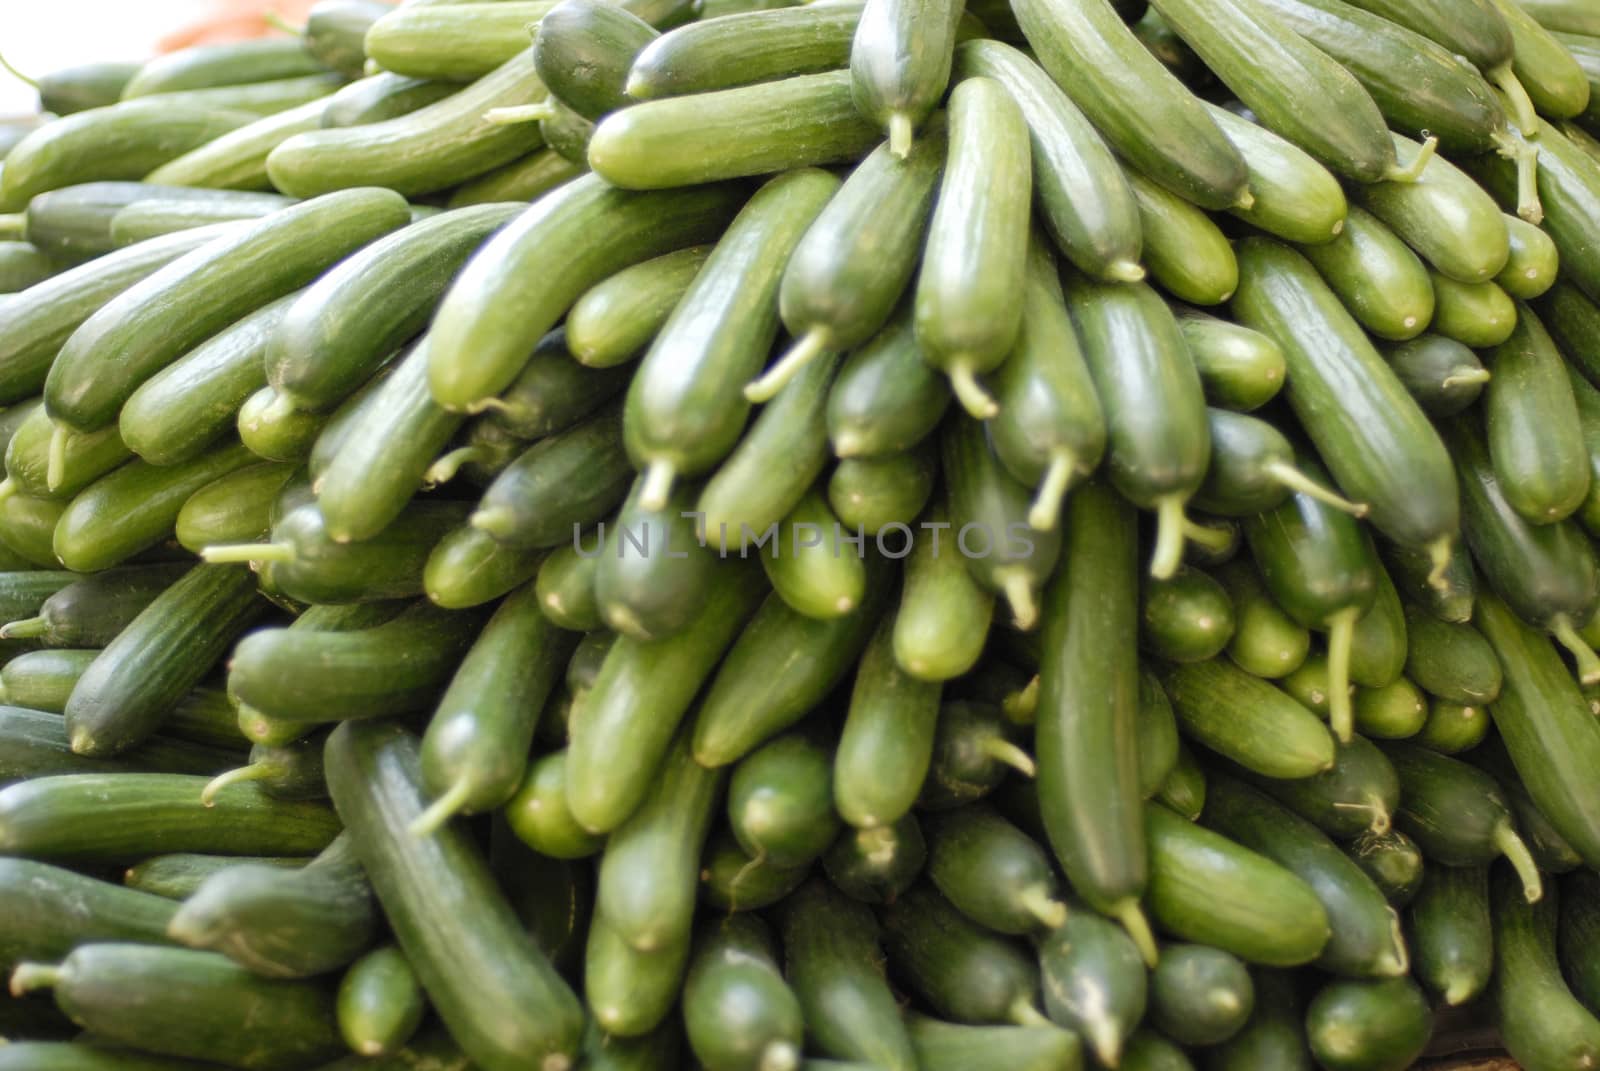 Cucumbers bunched together for sale at market by stockyimages